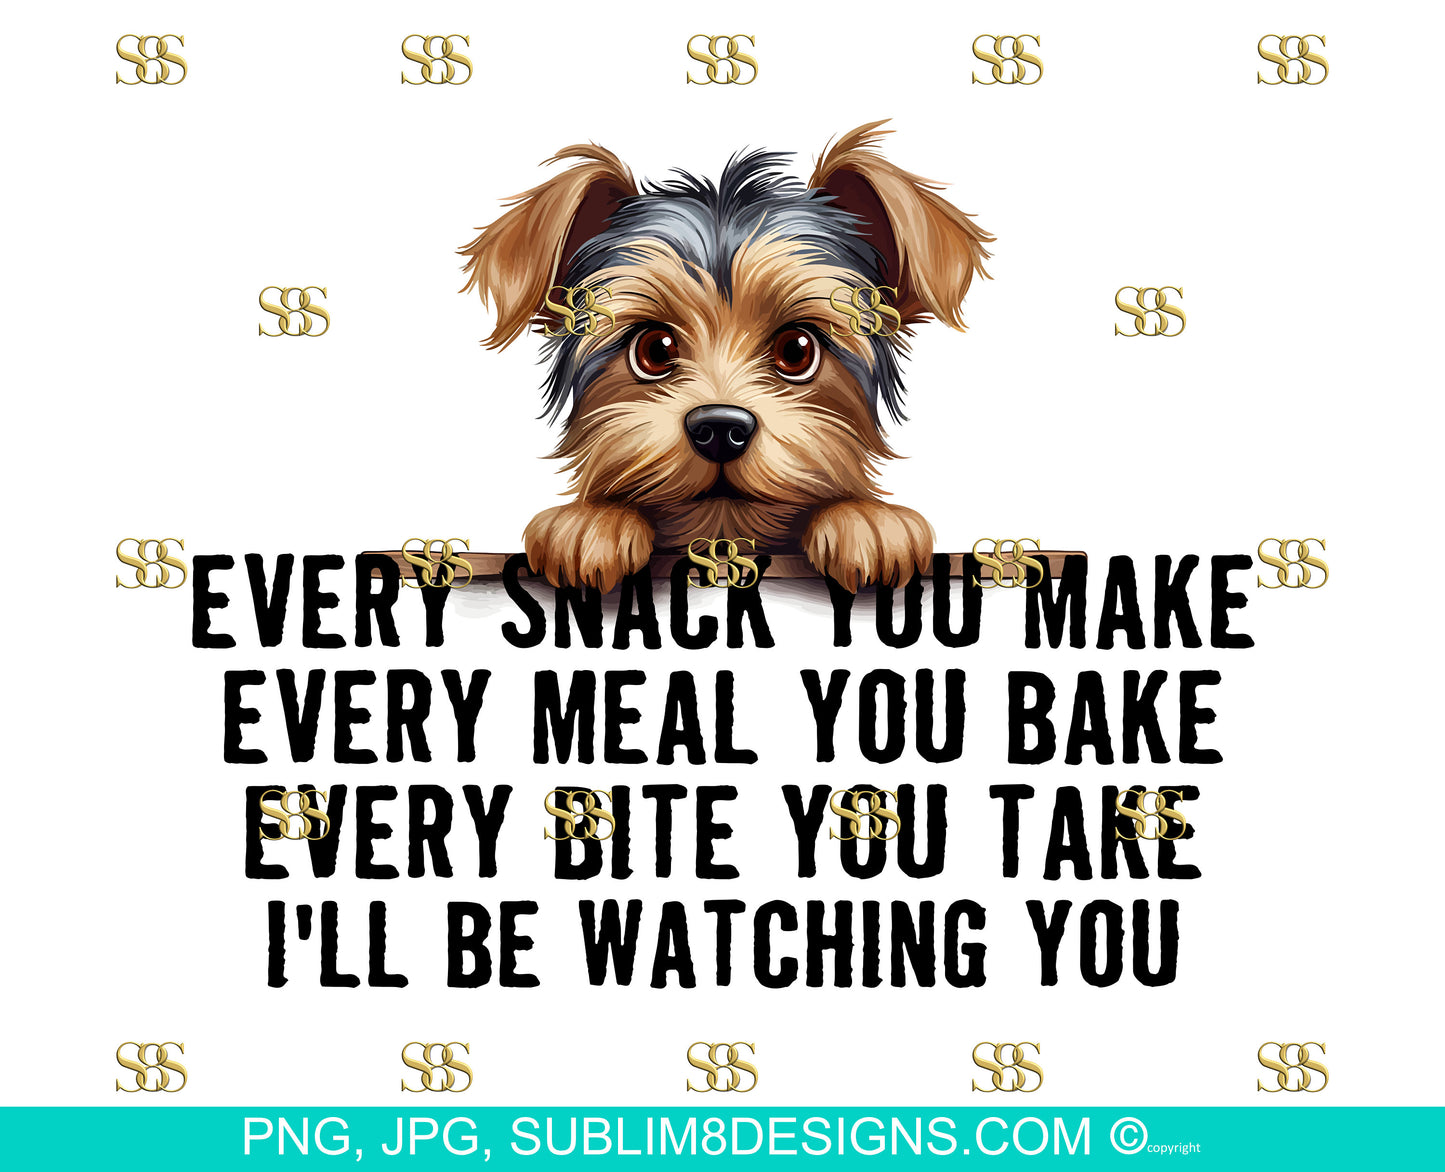 Snack-Obsessed Yorkshire Terrier: The Hilarious Table Peeker! Every Bite You Take I'll Be Watching You PNG and JPEG ONLY